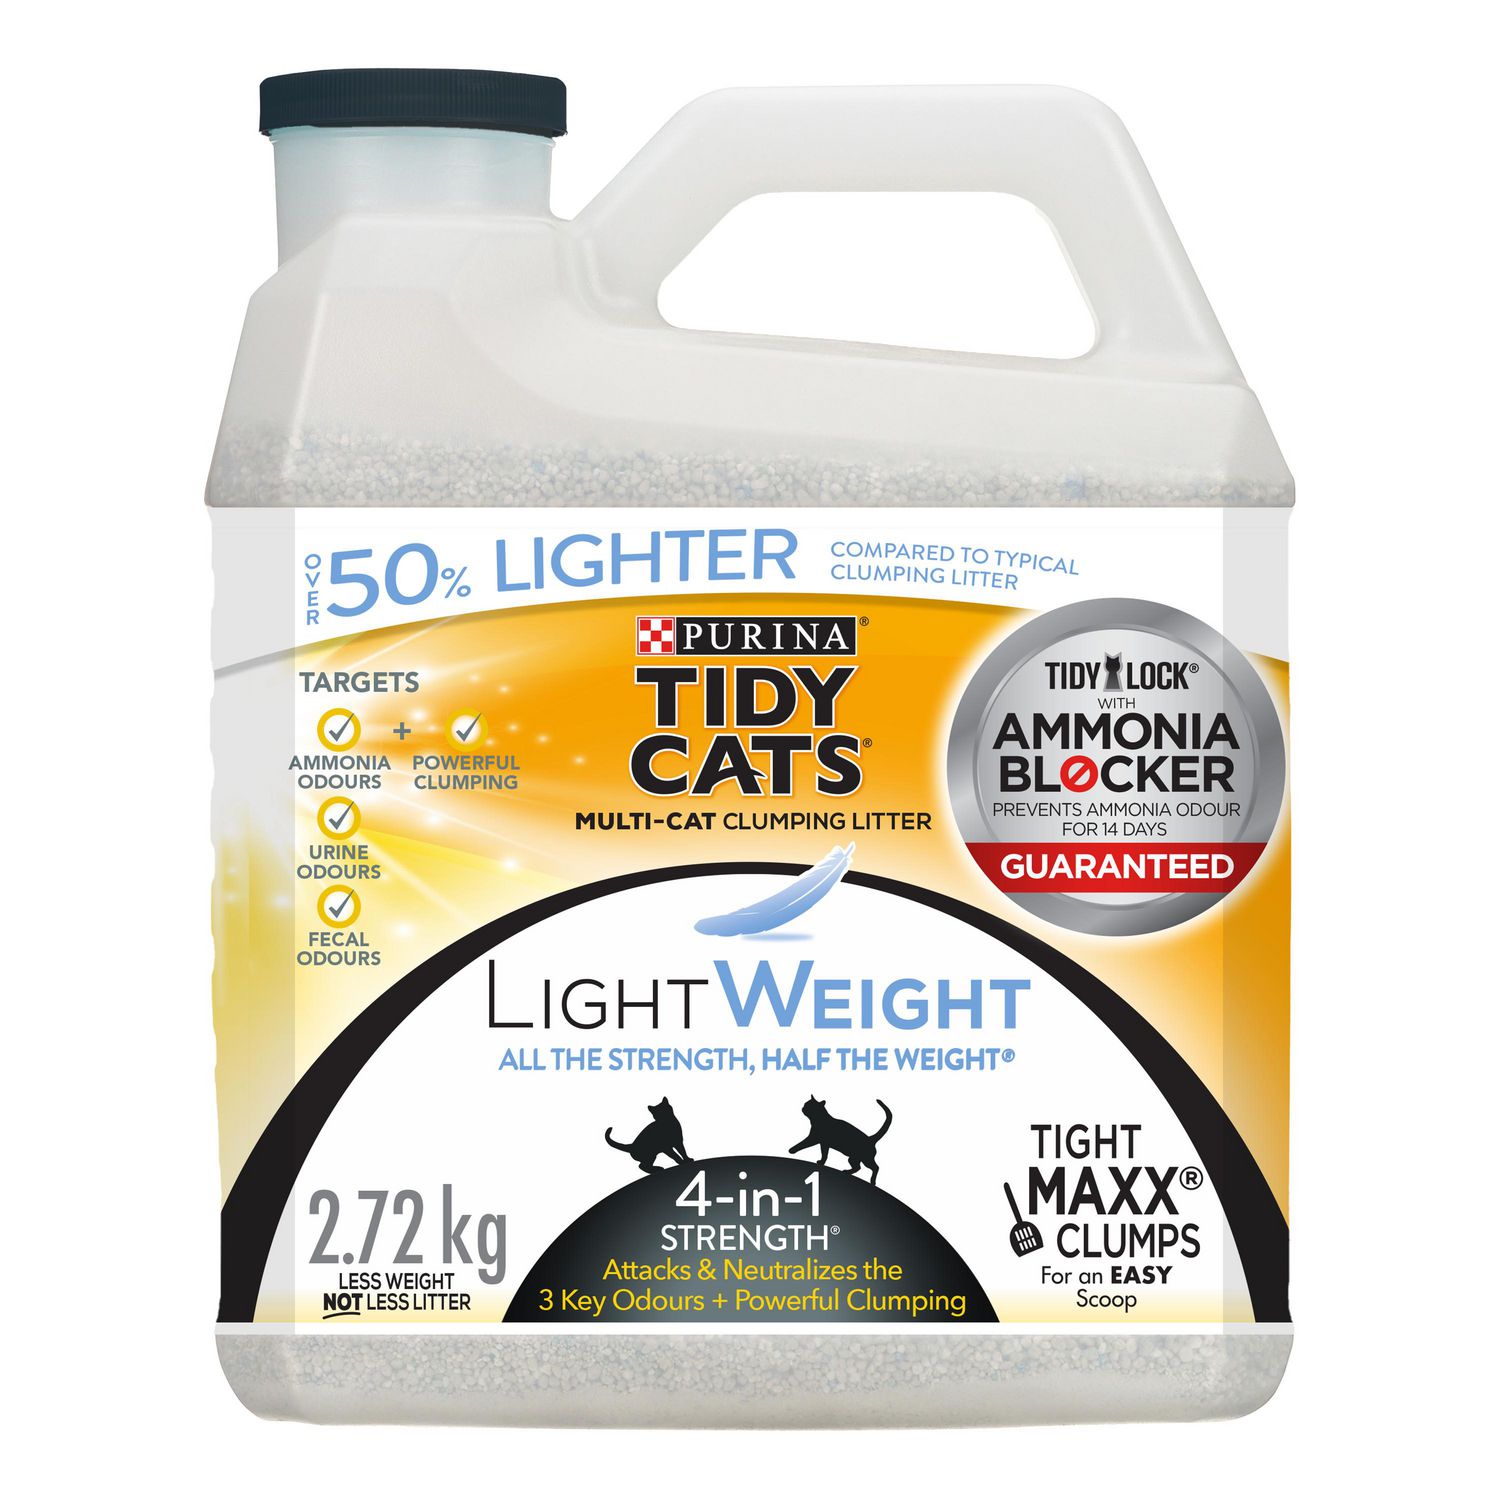 Tidy Cats 4in1 Strength Lightweight Cat Litter for Multiple Cats